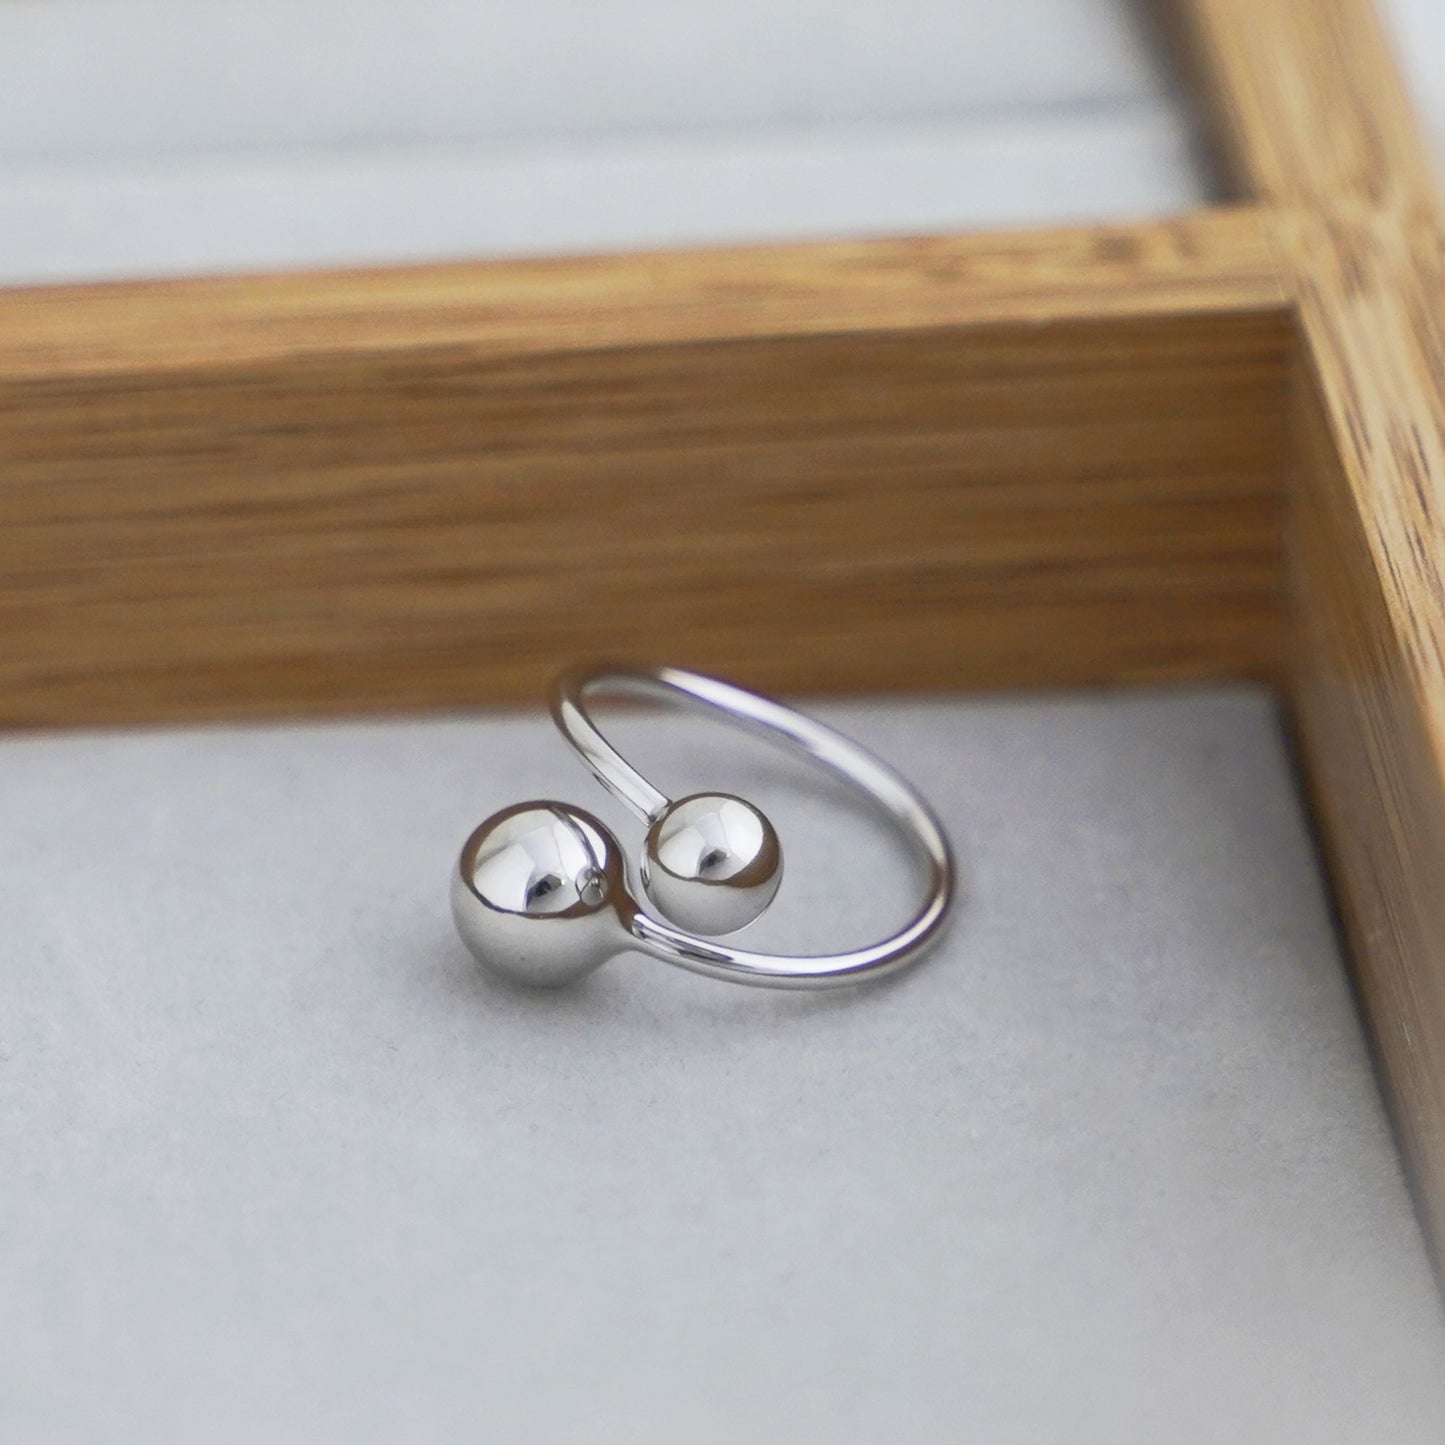 Adjustable Sterling Silver Bead Wrap Ring with Twist Design, 5mm, 6mm, and 8mm Balls - sugarkittenlondon